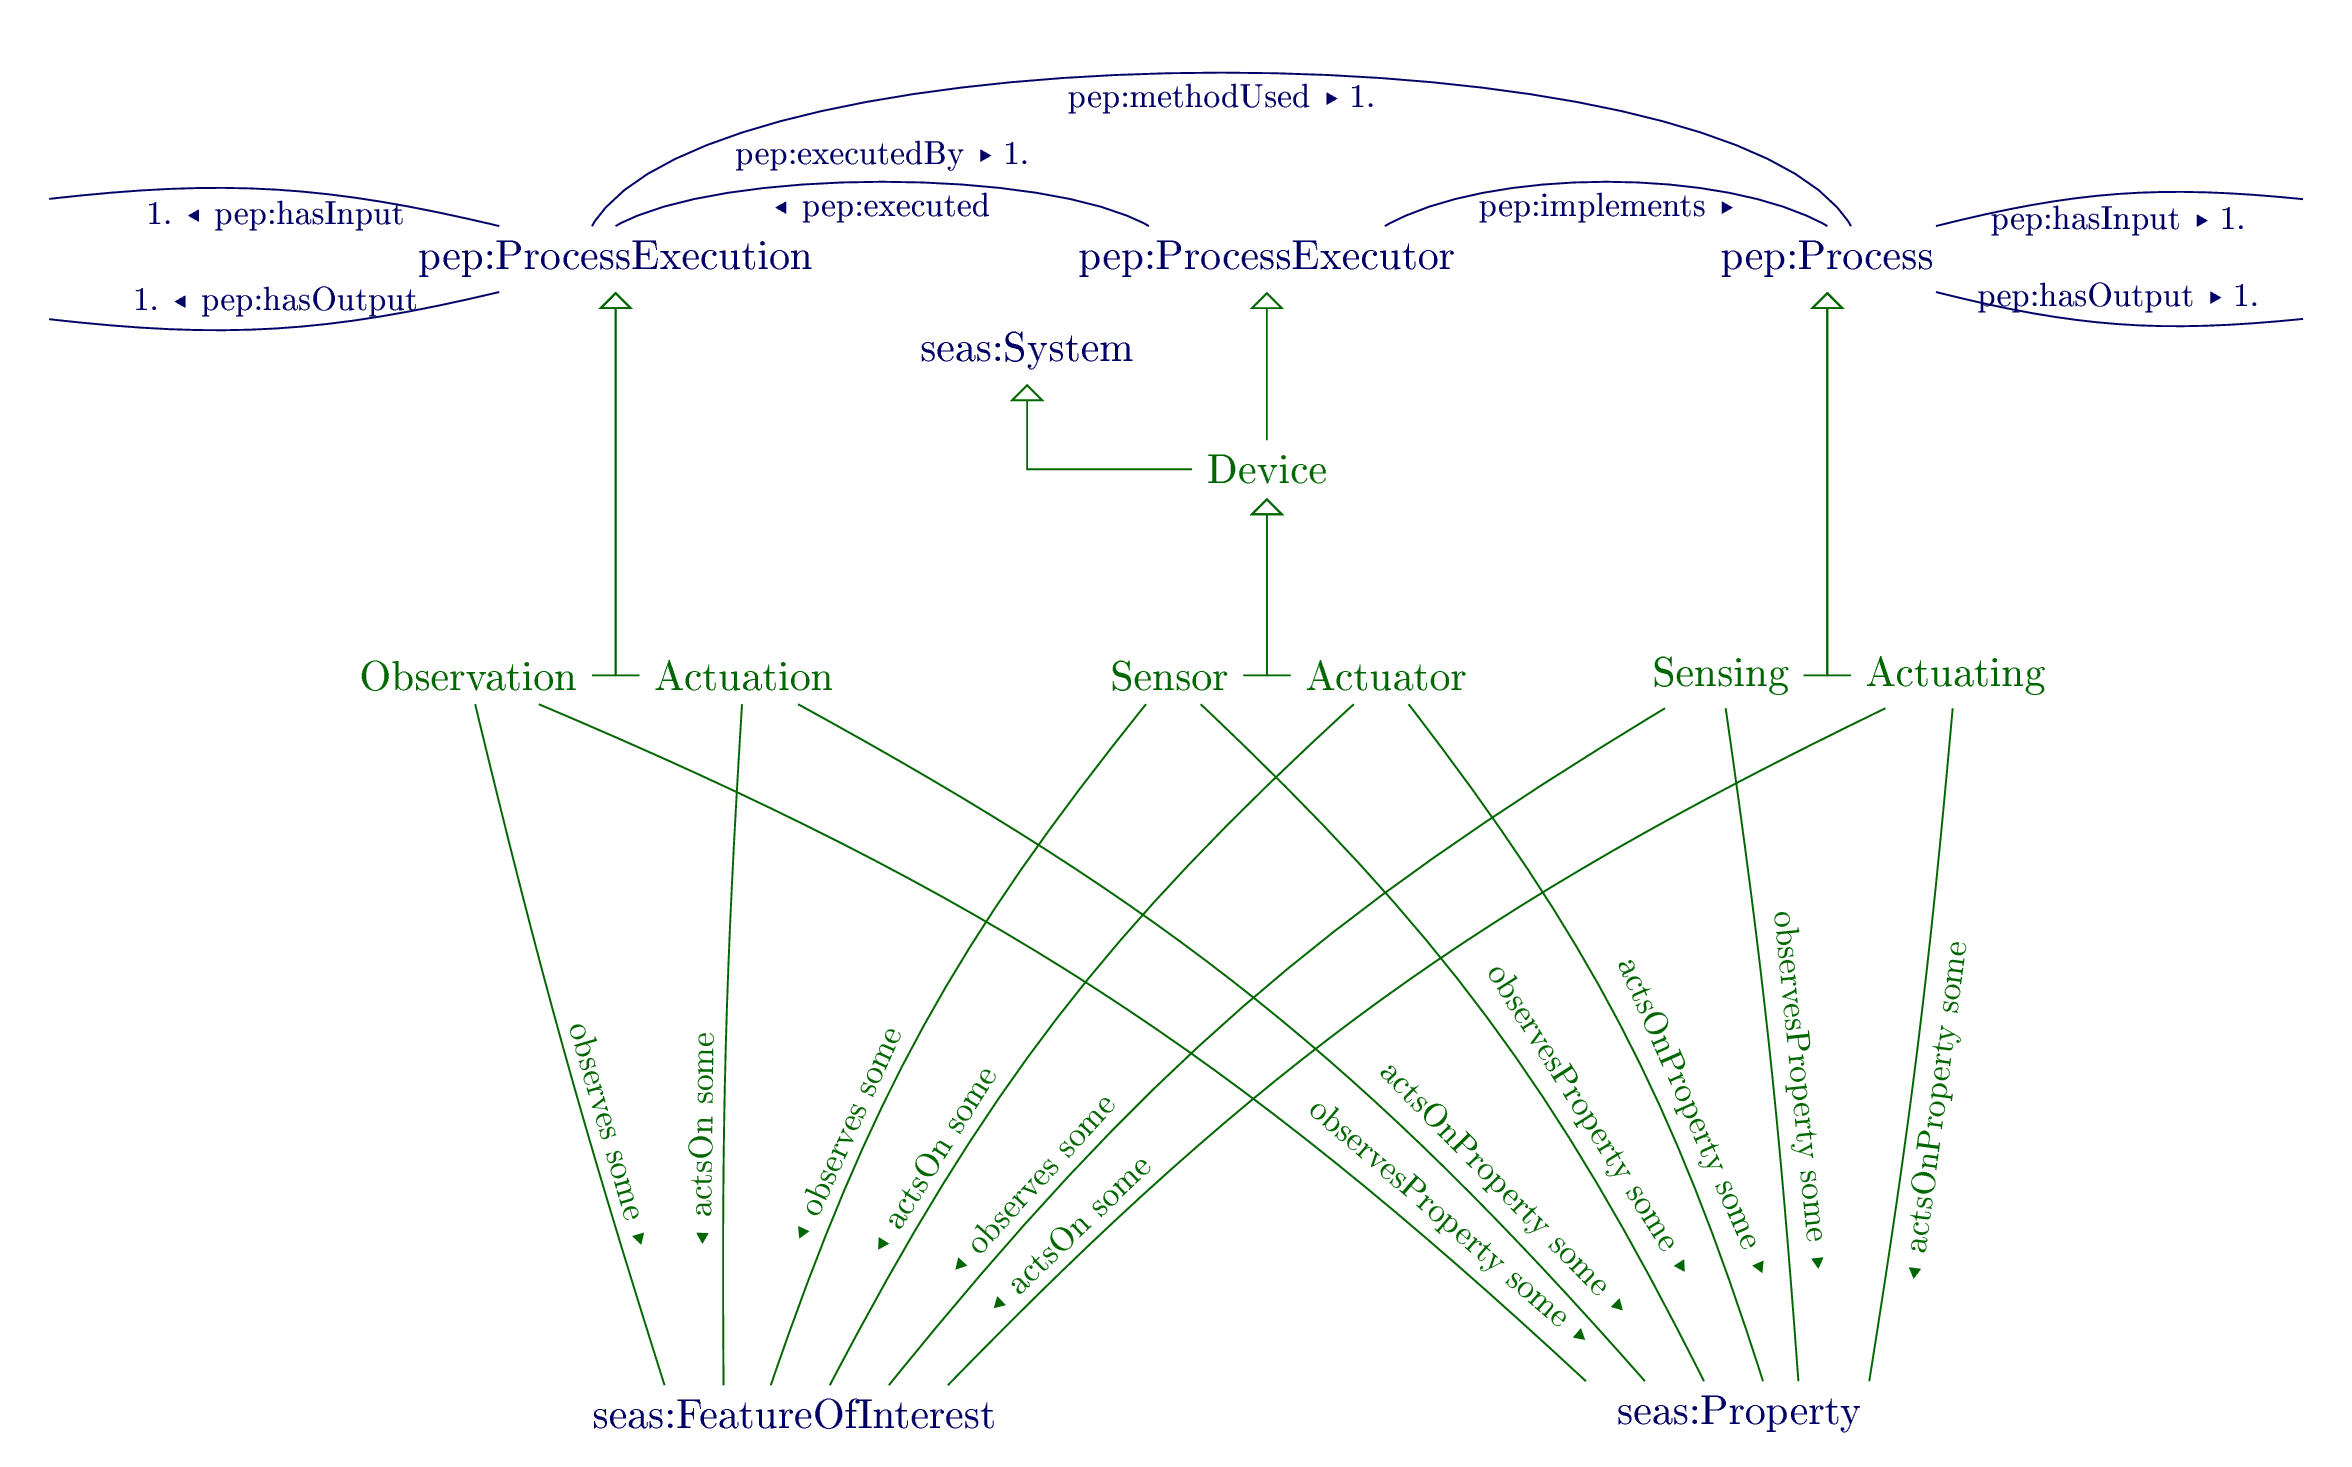 Overview of the Device ontology